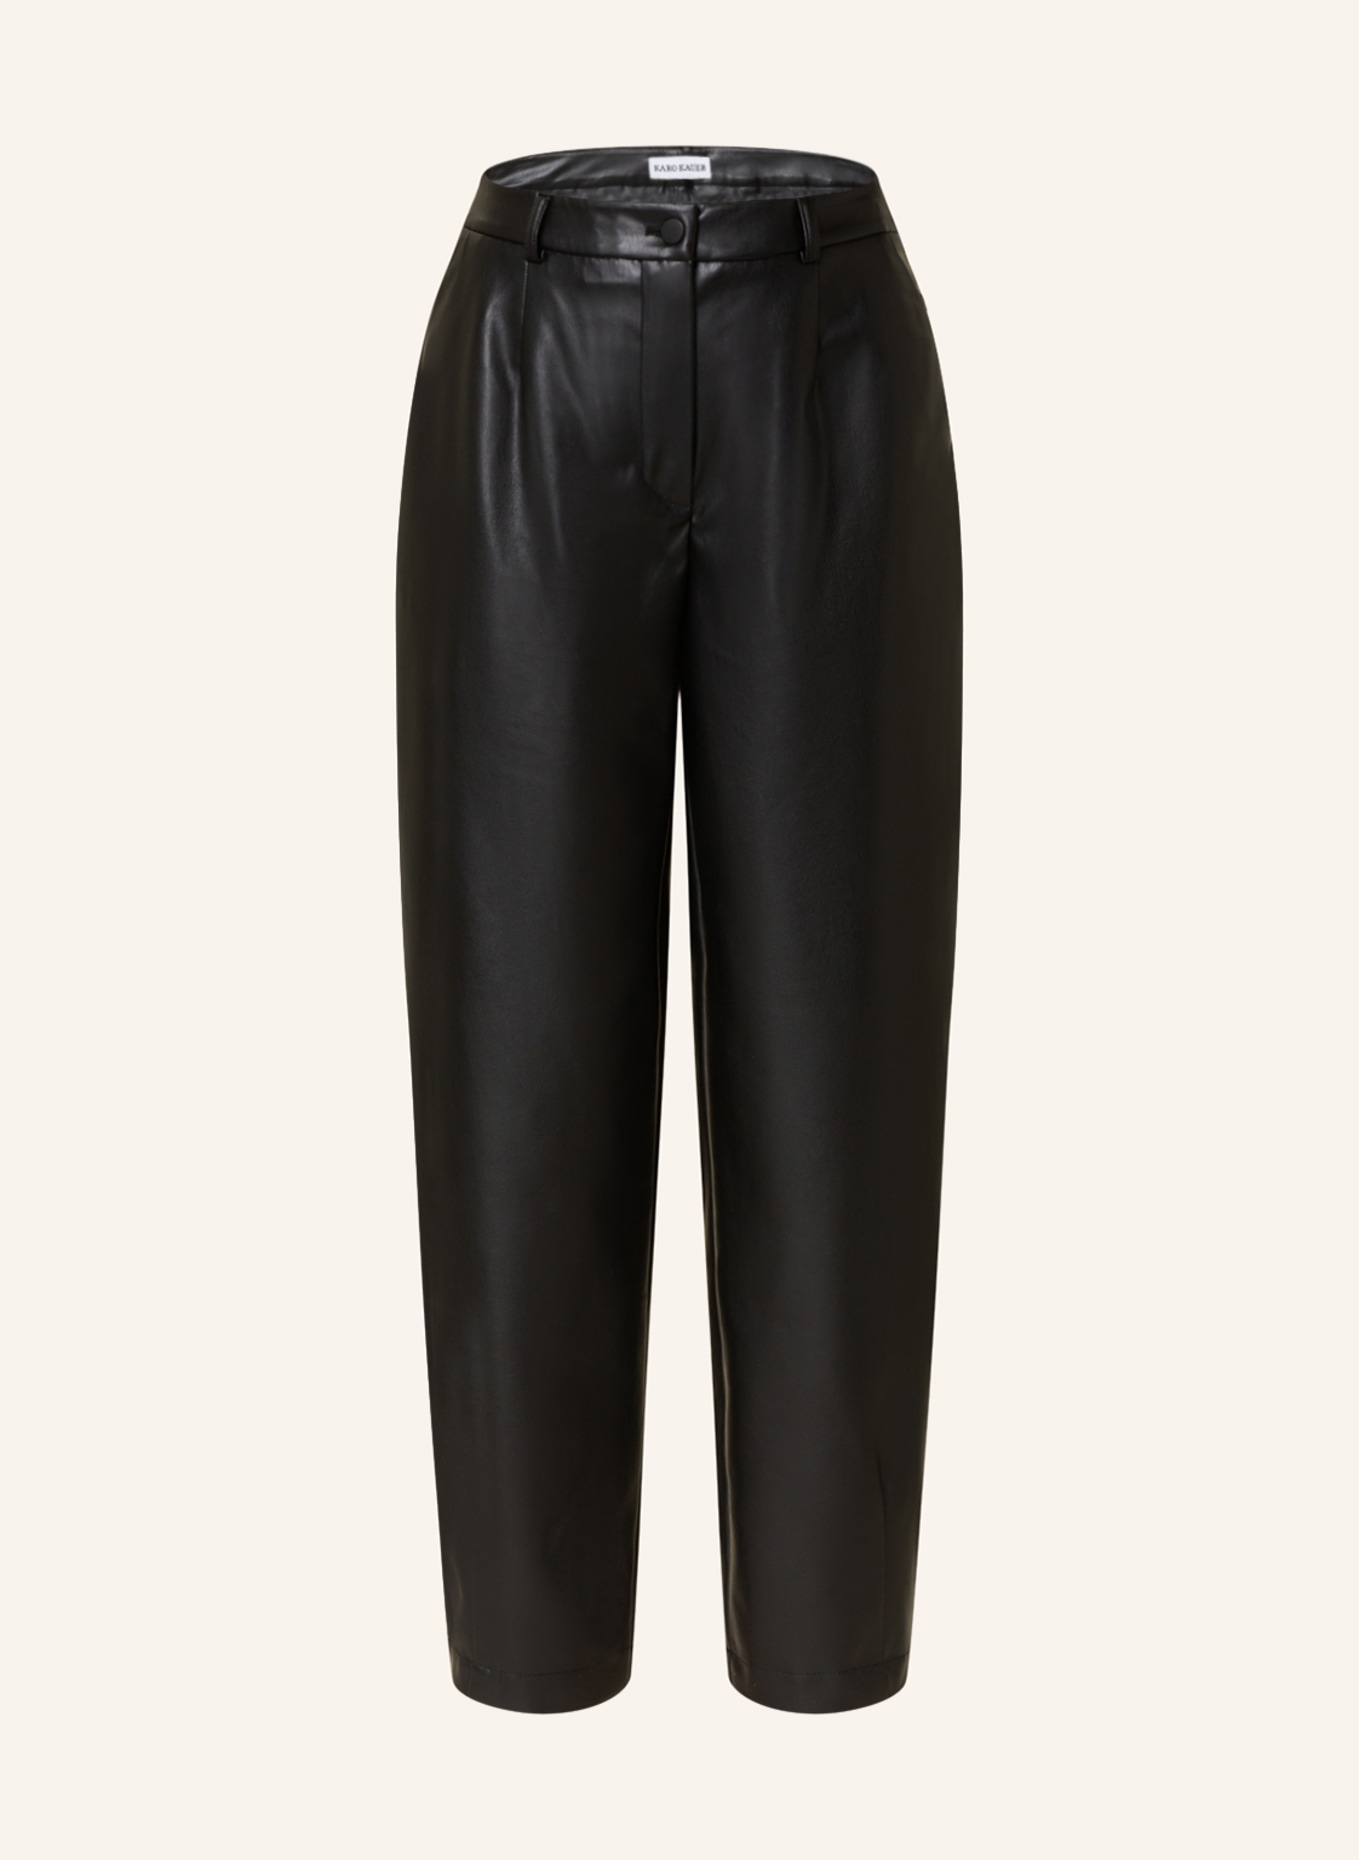 KARO KAUER 7/8 trousers in leather look, Color: BLACK (Image 1)